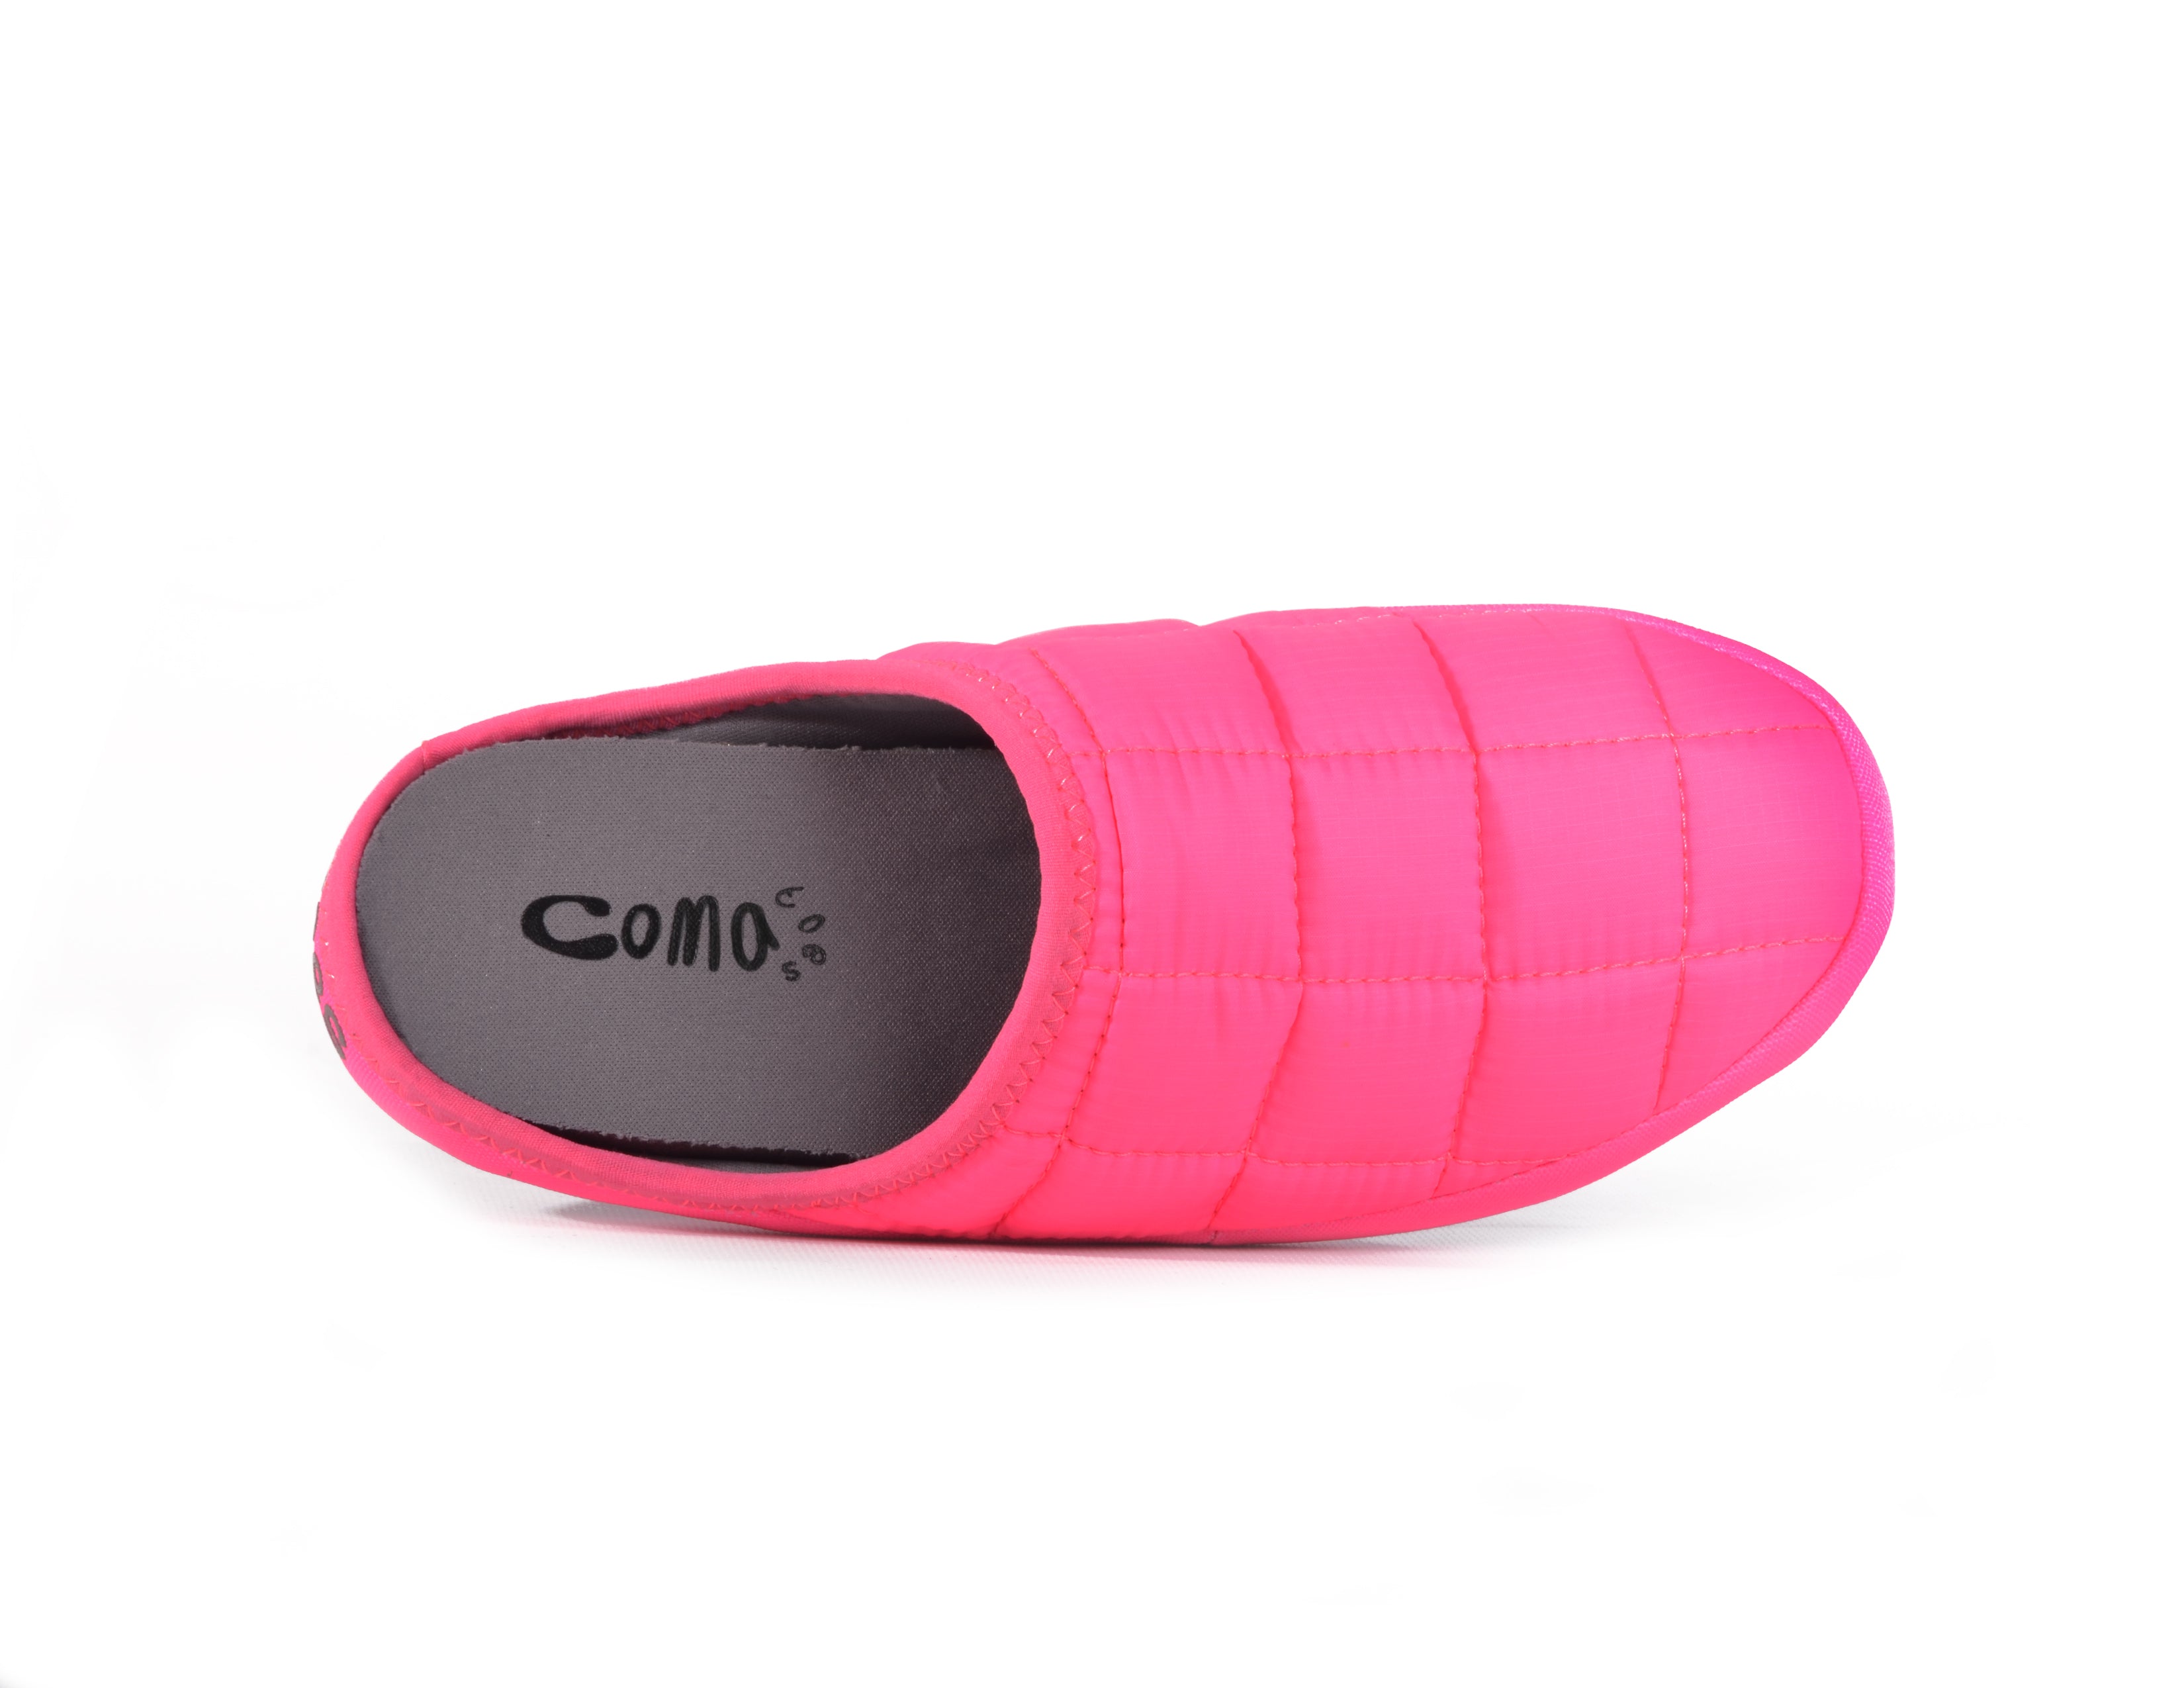 TOKYOES WOMENS FLURO PINK